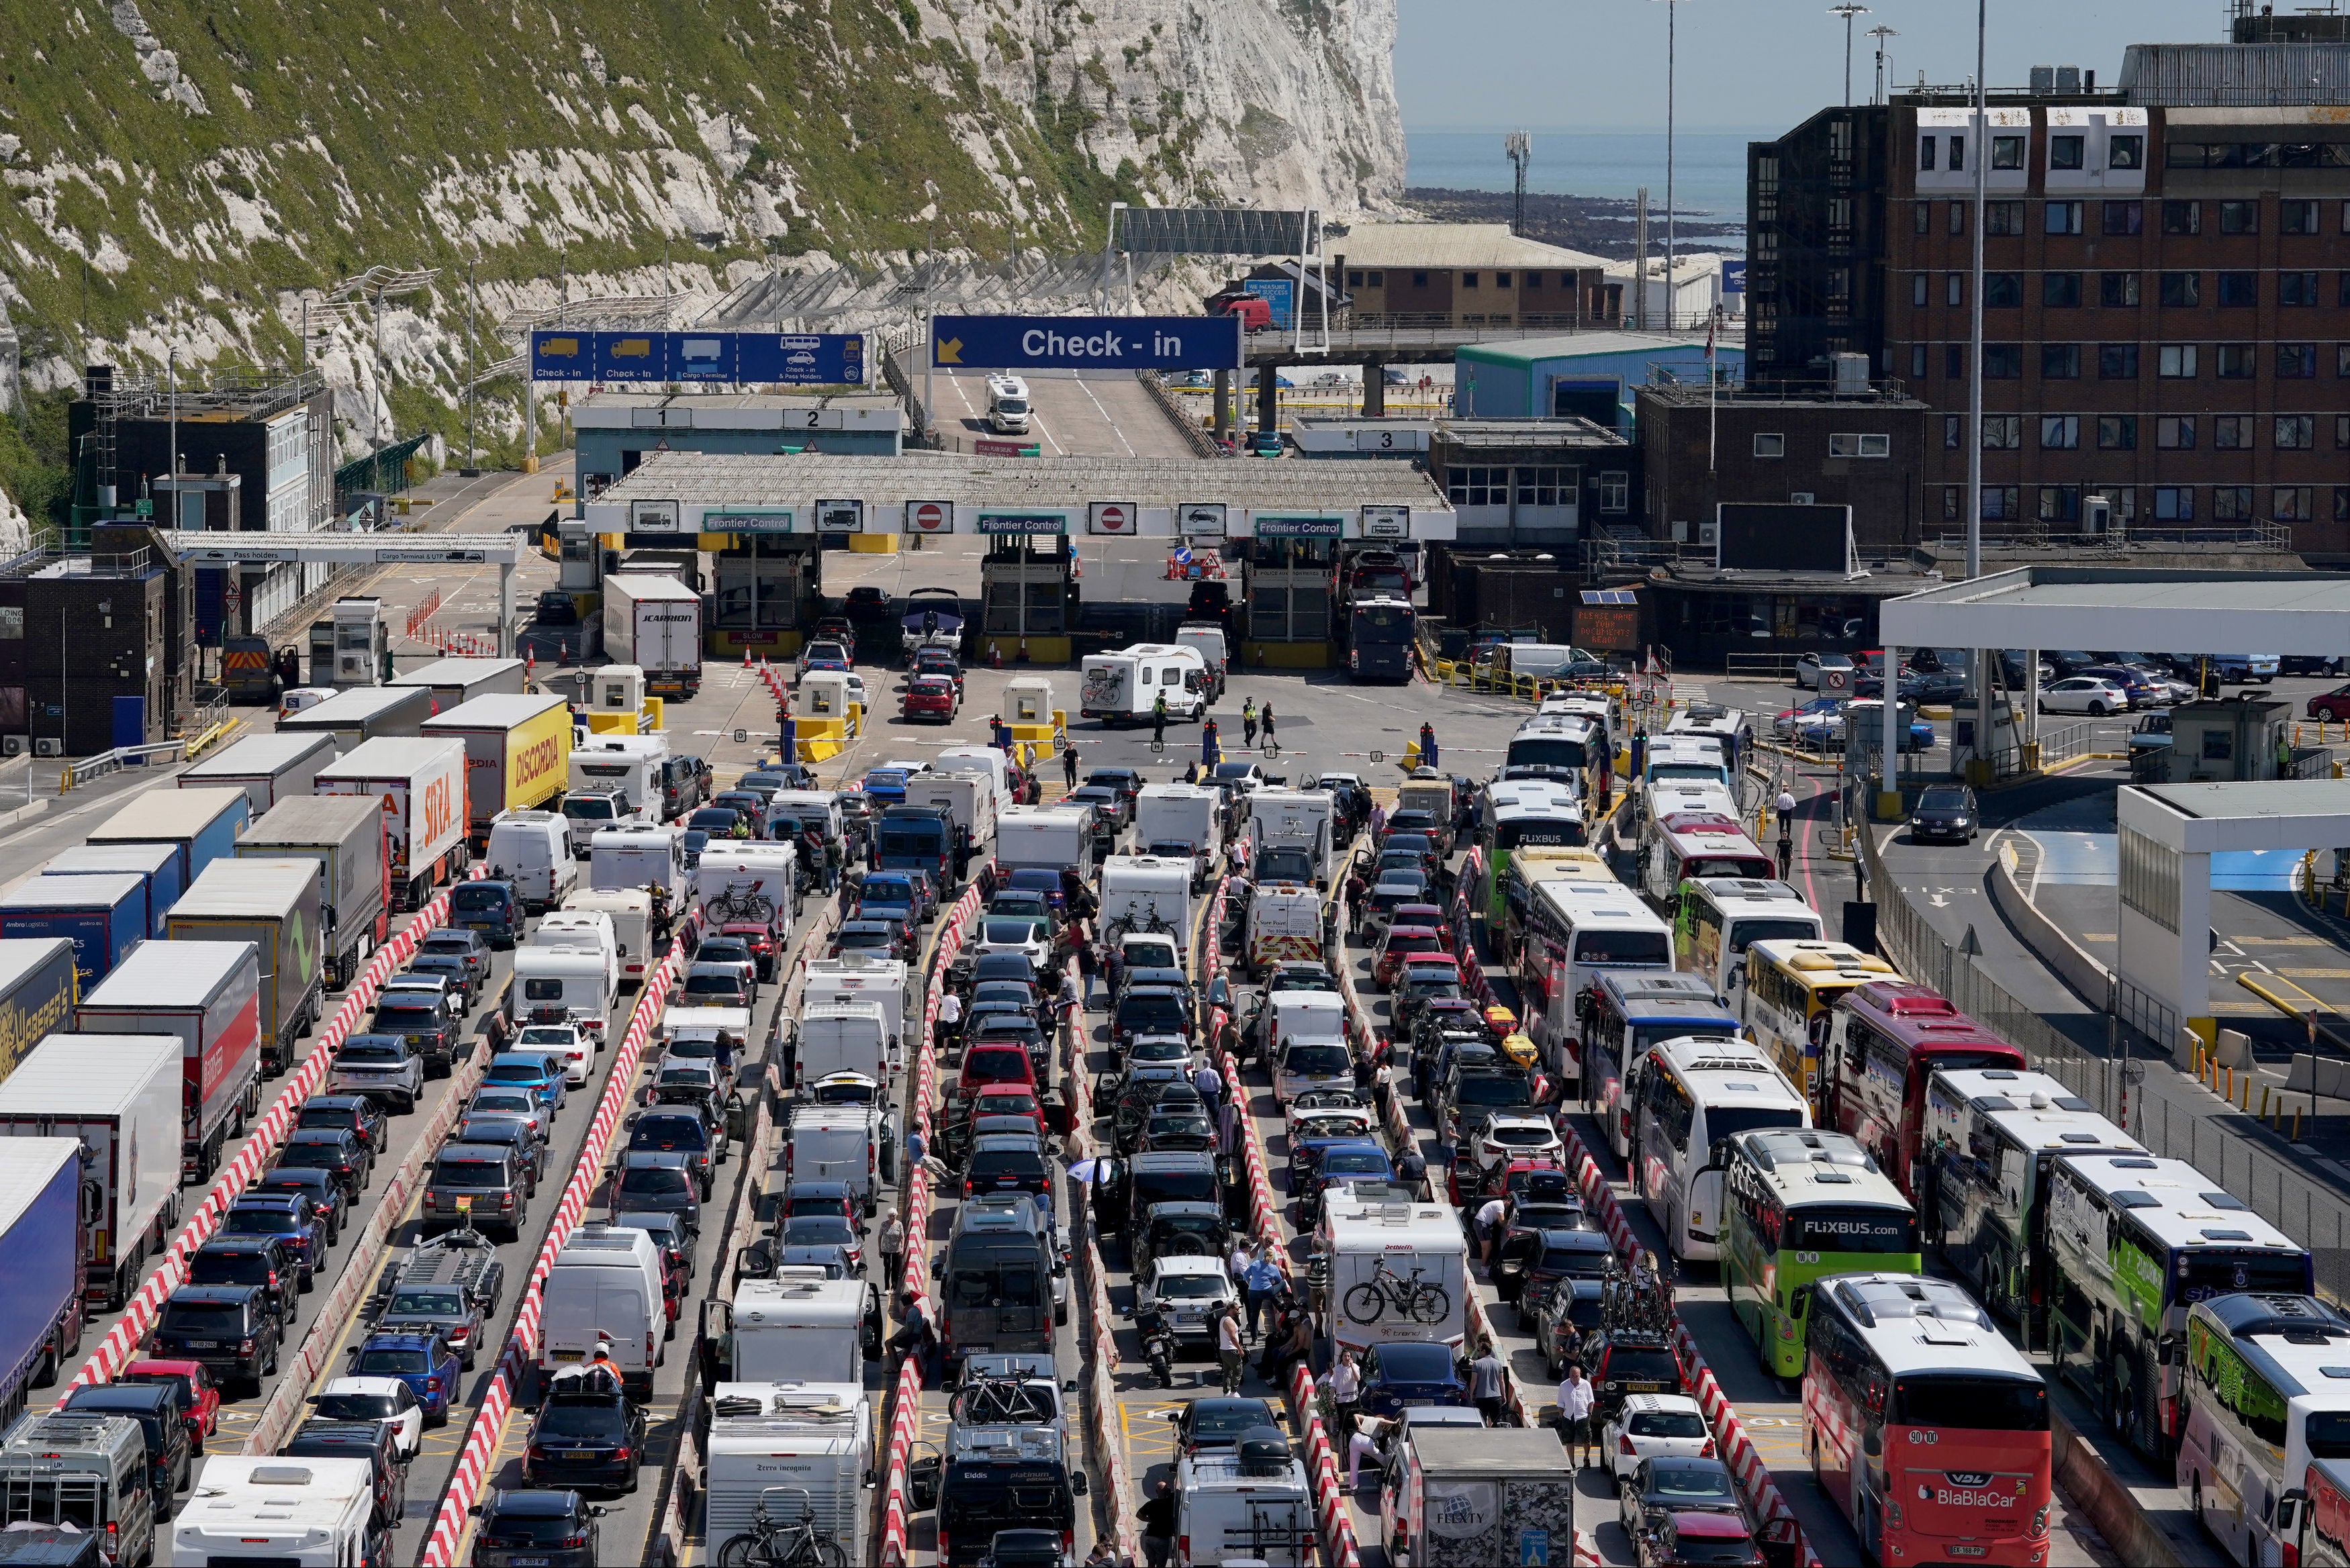 Waves of Brexit checks have cause delays and disruption at Port of Dover